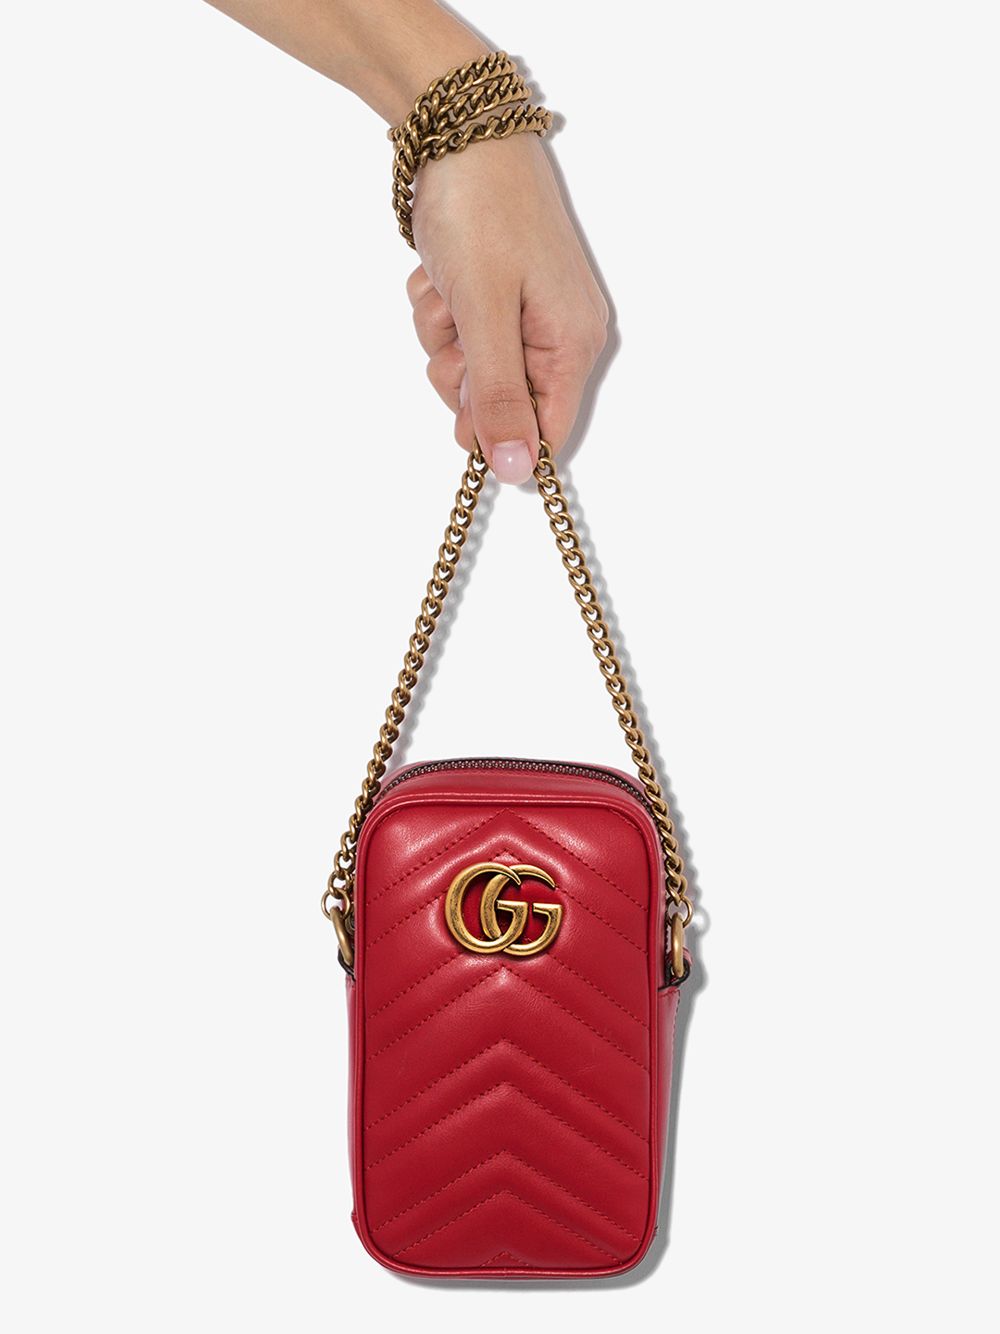 GUCCI RED MARMONT QUILTED LEATHER CROSS BODY BAG,598597DTDCT14549404